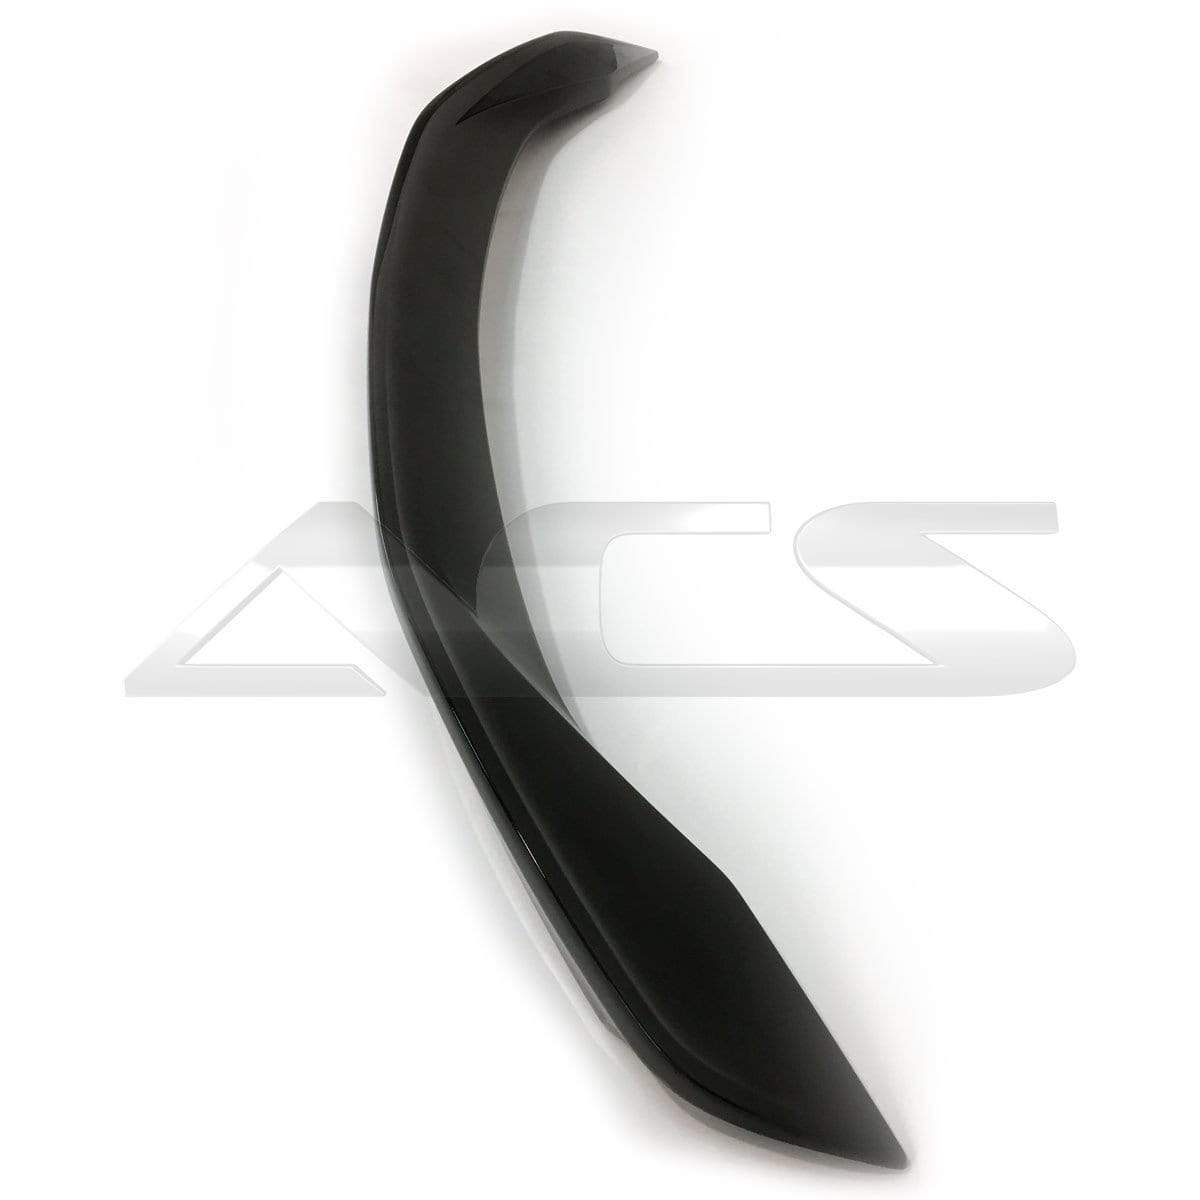 ACS Composite High Wing Spoiler in Mosaic Black Metallic for Camaro Coupe 16-18 V6 I4 | SKU 48-4-053 GB8